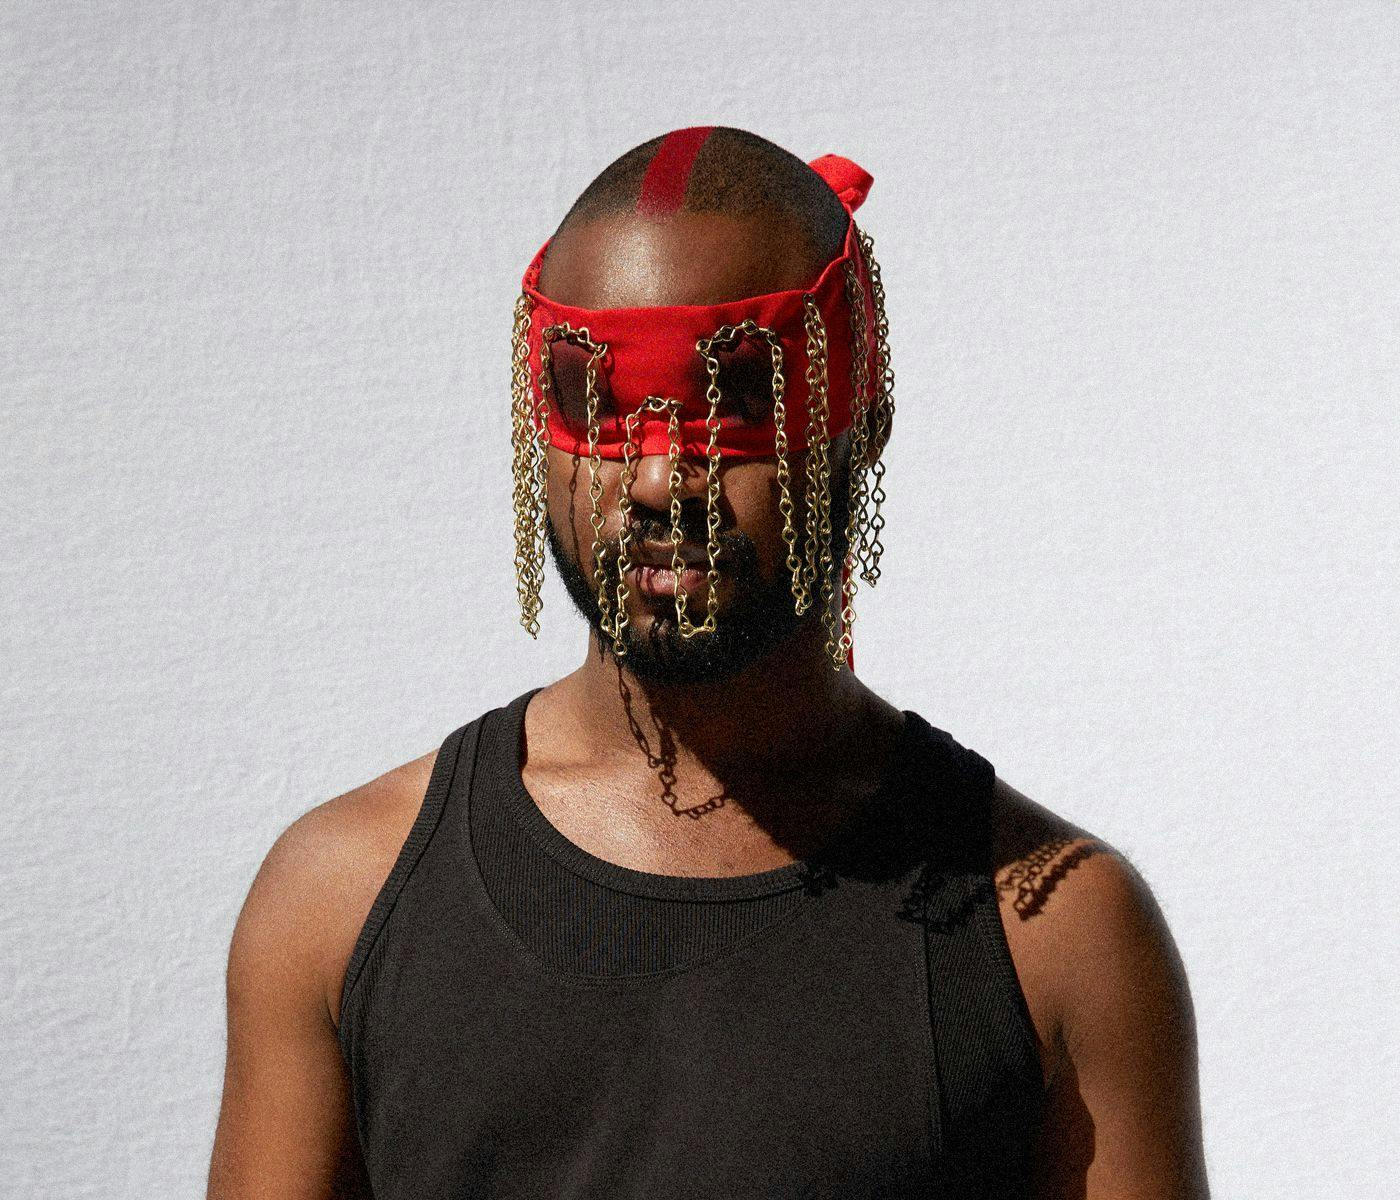 Genesis Owusu wearing a black tank-top and a ornate red chained bandana, covering their eyes.